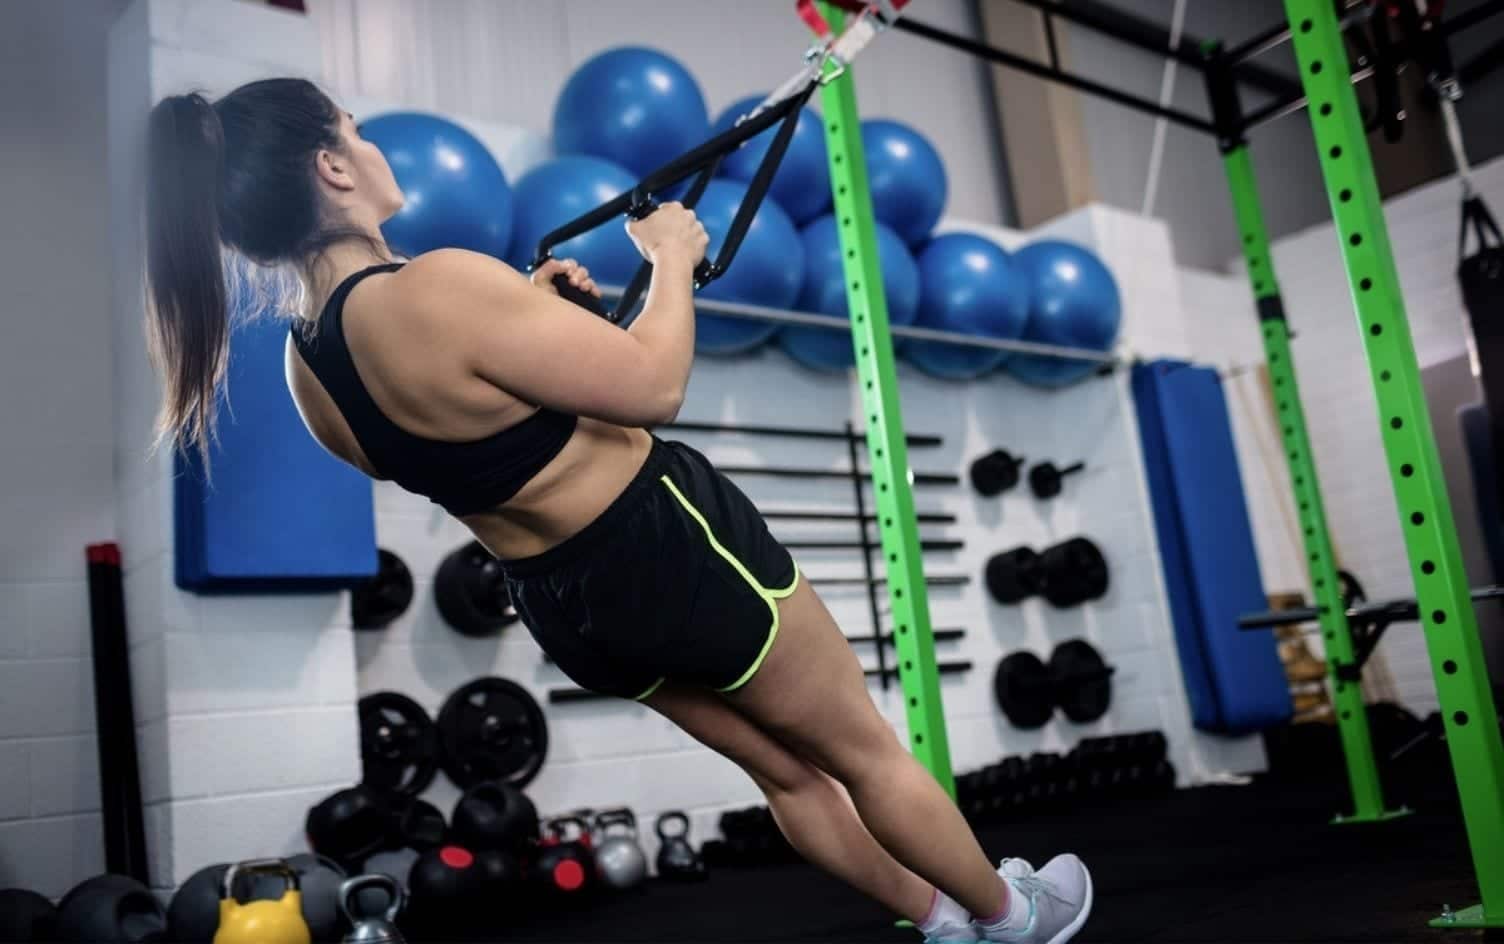 Hydraulic Resistance Training for High Calorie Burning - Breaking Muscle